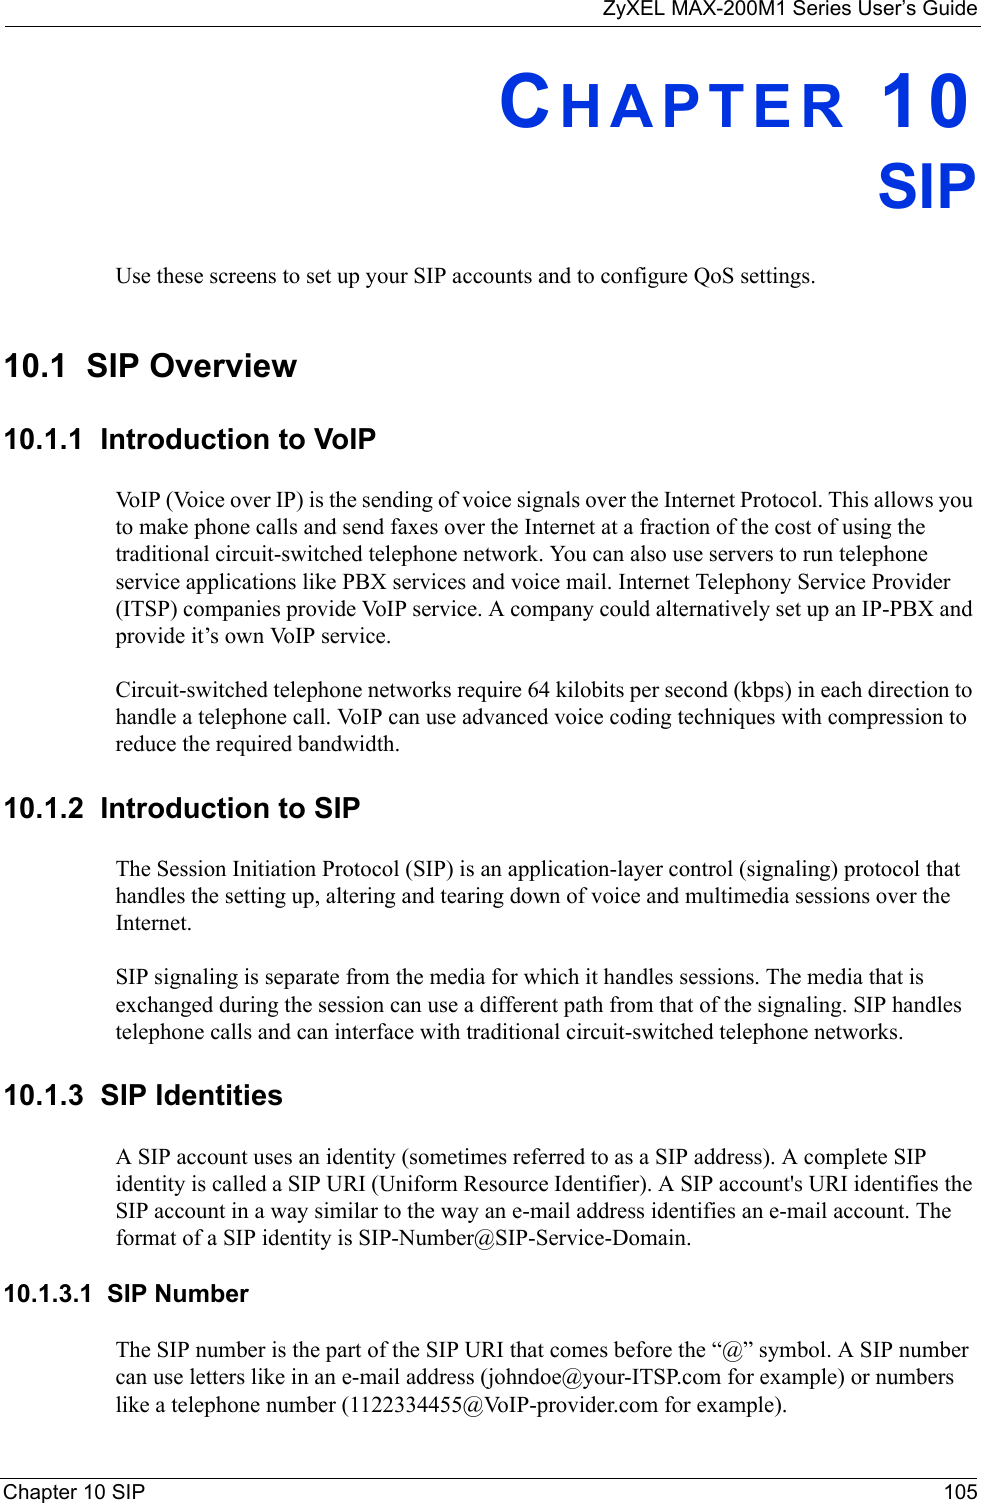 ZyXEL MAX-200M1 Series User’s GuideChapter 10 SIP 105CHAPTER 10SIPUse these screens to set up your SIP accounts and to configure QoS settings.10.1  SIP Overview10.1.1  Introduction to VoIPVoIP (Voice over IP) is the sending of voice signals over the Internet Protocol. This allows you to make phone calls and send faxes over the Internet at a fraction of the cost of using the traditional circuit-switched telephone network. You can also use servers to run telephone service applications like PBX services and voice mail. Internet Telephony Service Provider (ITSP) companies provide VoIP service. A company could alternatively set up an IP-PBX and provide it’s own VoIP service.Circuit-switched telephone networks require 64 kilobits per second (kbps) in each direction to handle a telephone call. VoIP can use advanced voice coding techniques with compression to reduce the required bandwidth. 10.1.2  Introduction to SIPThe Session Initiation Protocol (SIP) is an application-layer control (signaling) protocol that handles the setting up, altering and tearing down of voice and multimedia sessions over the Internet.SIP signaling is separate from the media for which it handles sessions. The media that is exchanged during the session can use a different path from that of the signaling. SIP handles telephone calls and can interface with traditional circuit-switched telephone networks.10.1.3  SIP IdentitiesA SIP account uses an identity (sometimes referred to as a SIP address). A complete SIP identity is called a SIP URI (Uniform Resource Identifier). A SIP account&apos;s URI identifies the SIP account in a way similar to the way an e-mail address identifies an e-mail account. The format of a SIP identity is SIP-Number@SIP-Service-Domain.10.1.3.1  SIP NumberThe SIP number is the part of the SIP URI that comes before the “@” symbol. A SIP number can use letters like in an e-mail address (johndoe@your-ITSP.com for example) or numbers like a telephone number (1122334455@VoIP-provider.com for example).